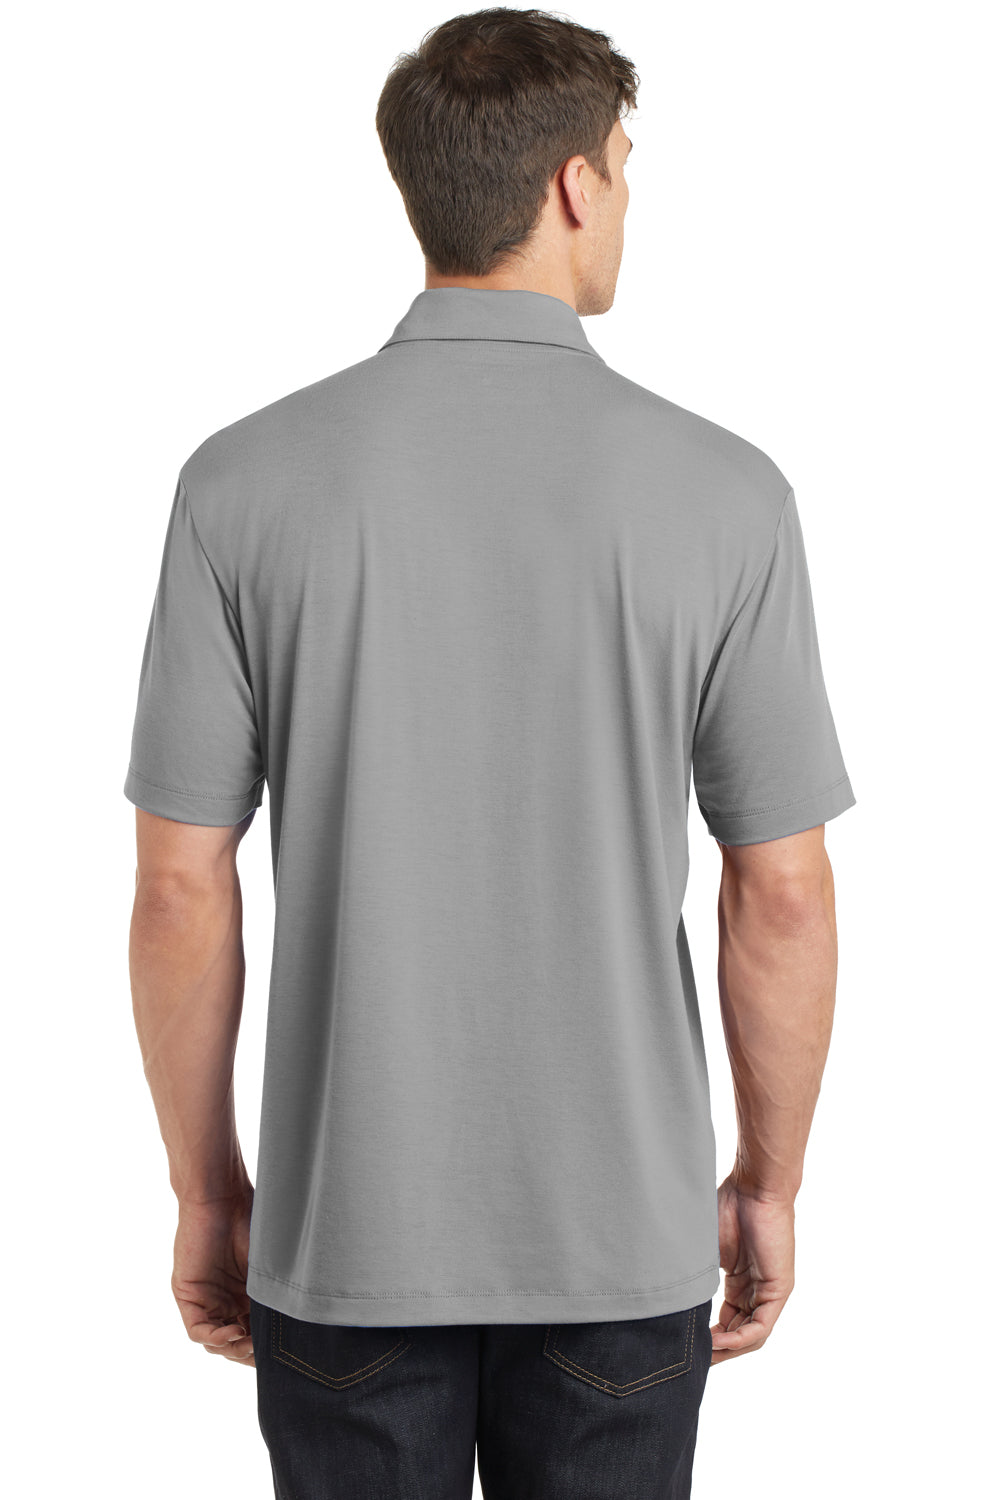 Port Authority K568 Mens Cotton Touch Performance Moisture Wicking Short Sleeve Polo Shirt Grey Back